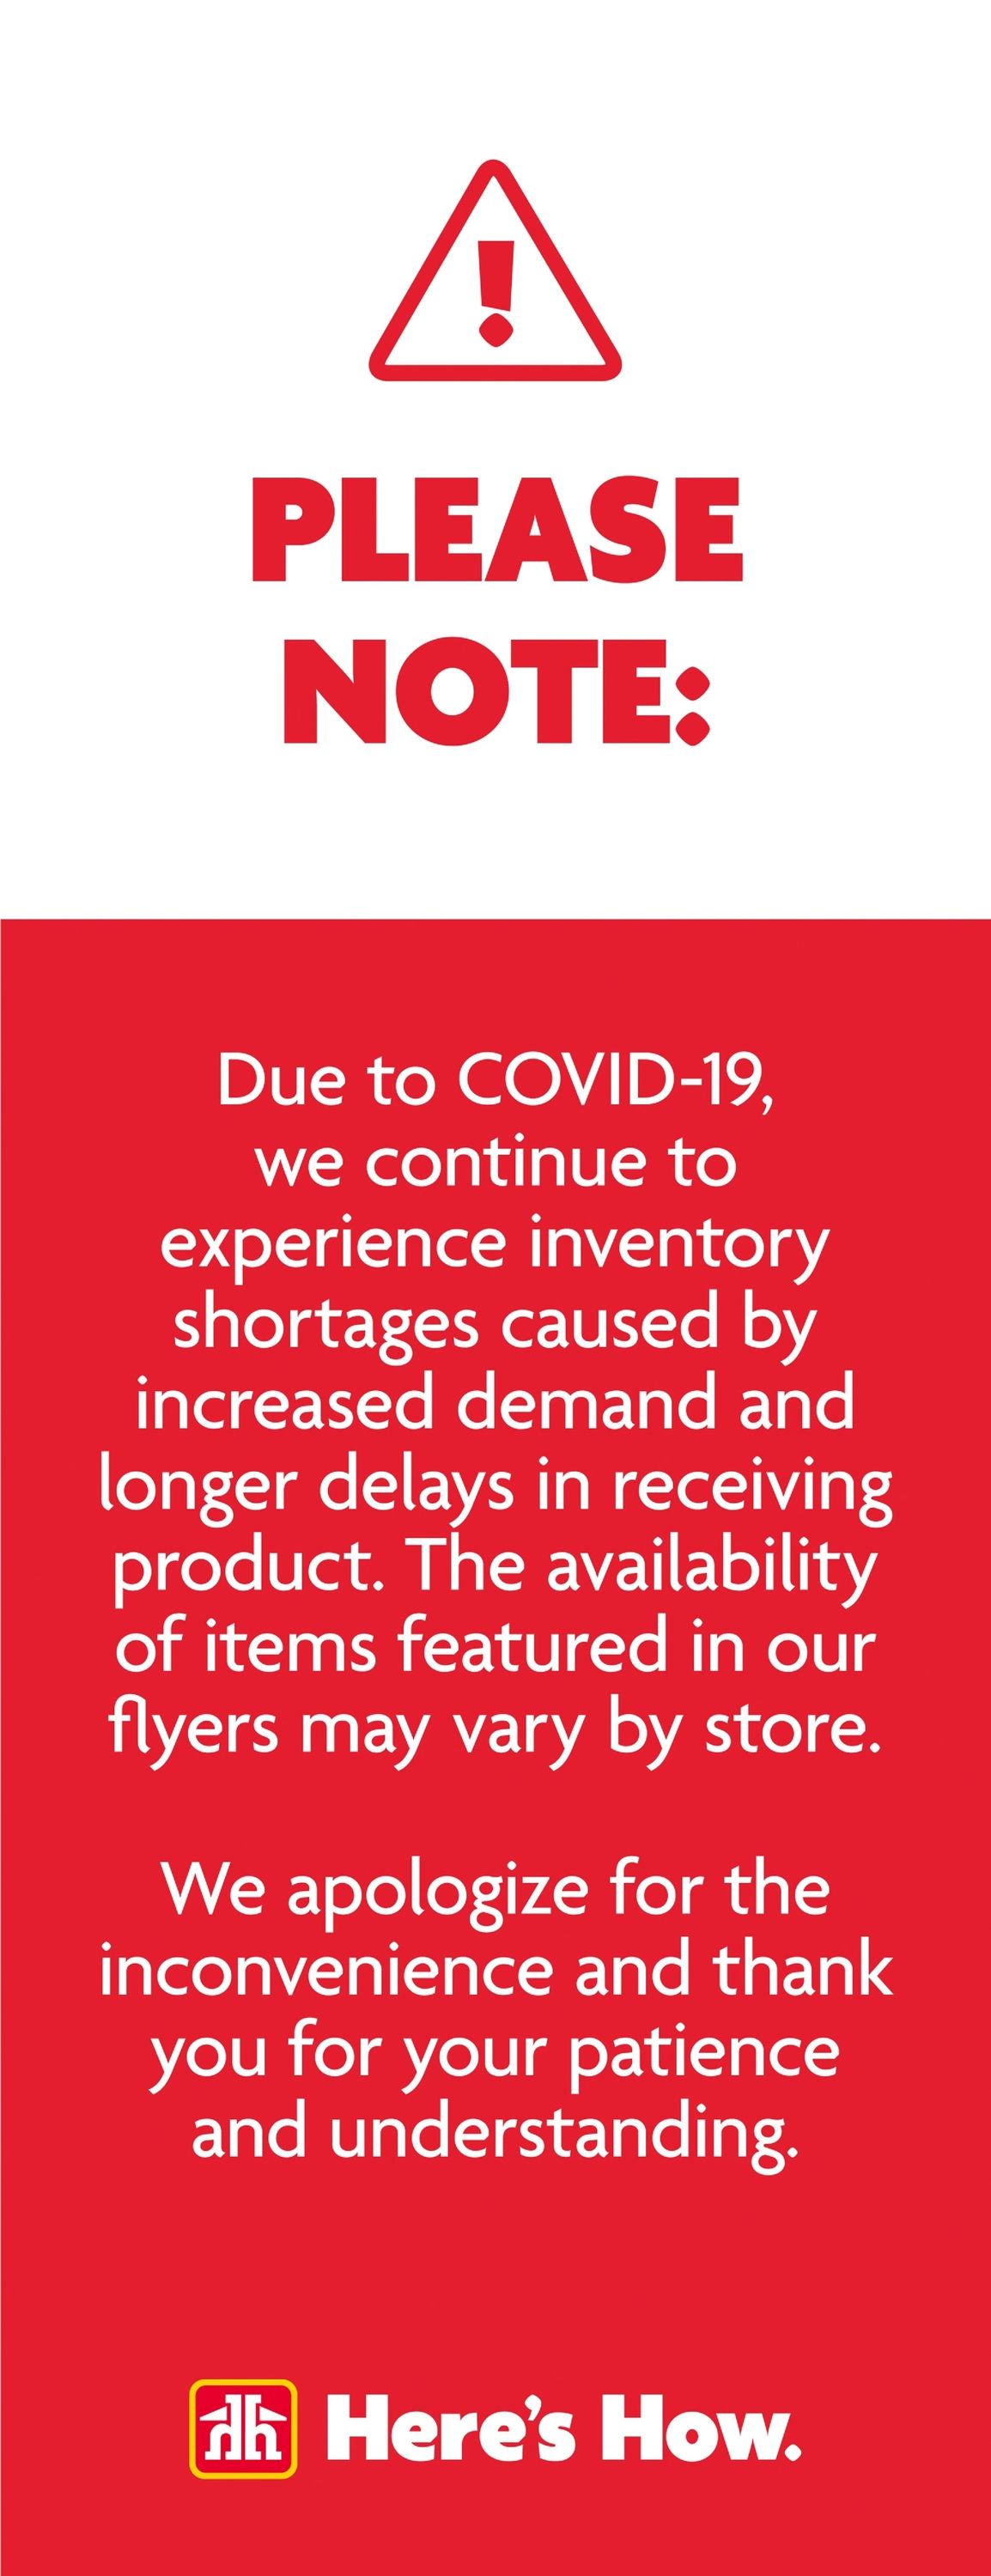 Home Hardware Flyer from 02/24/2022